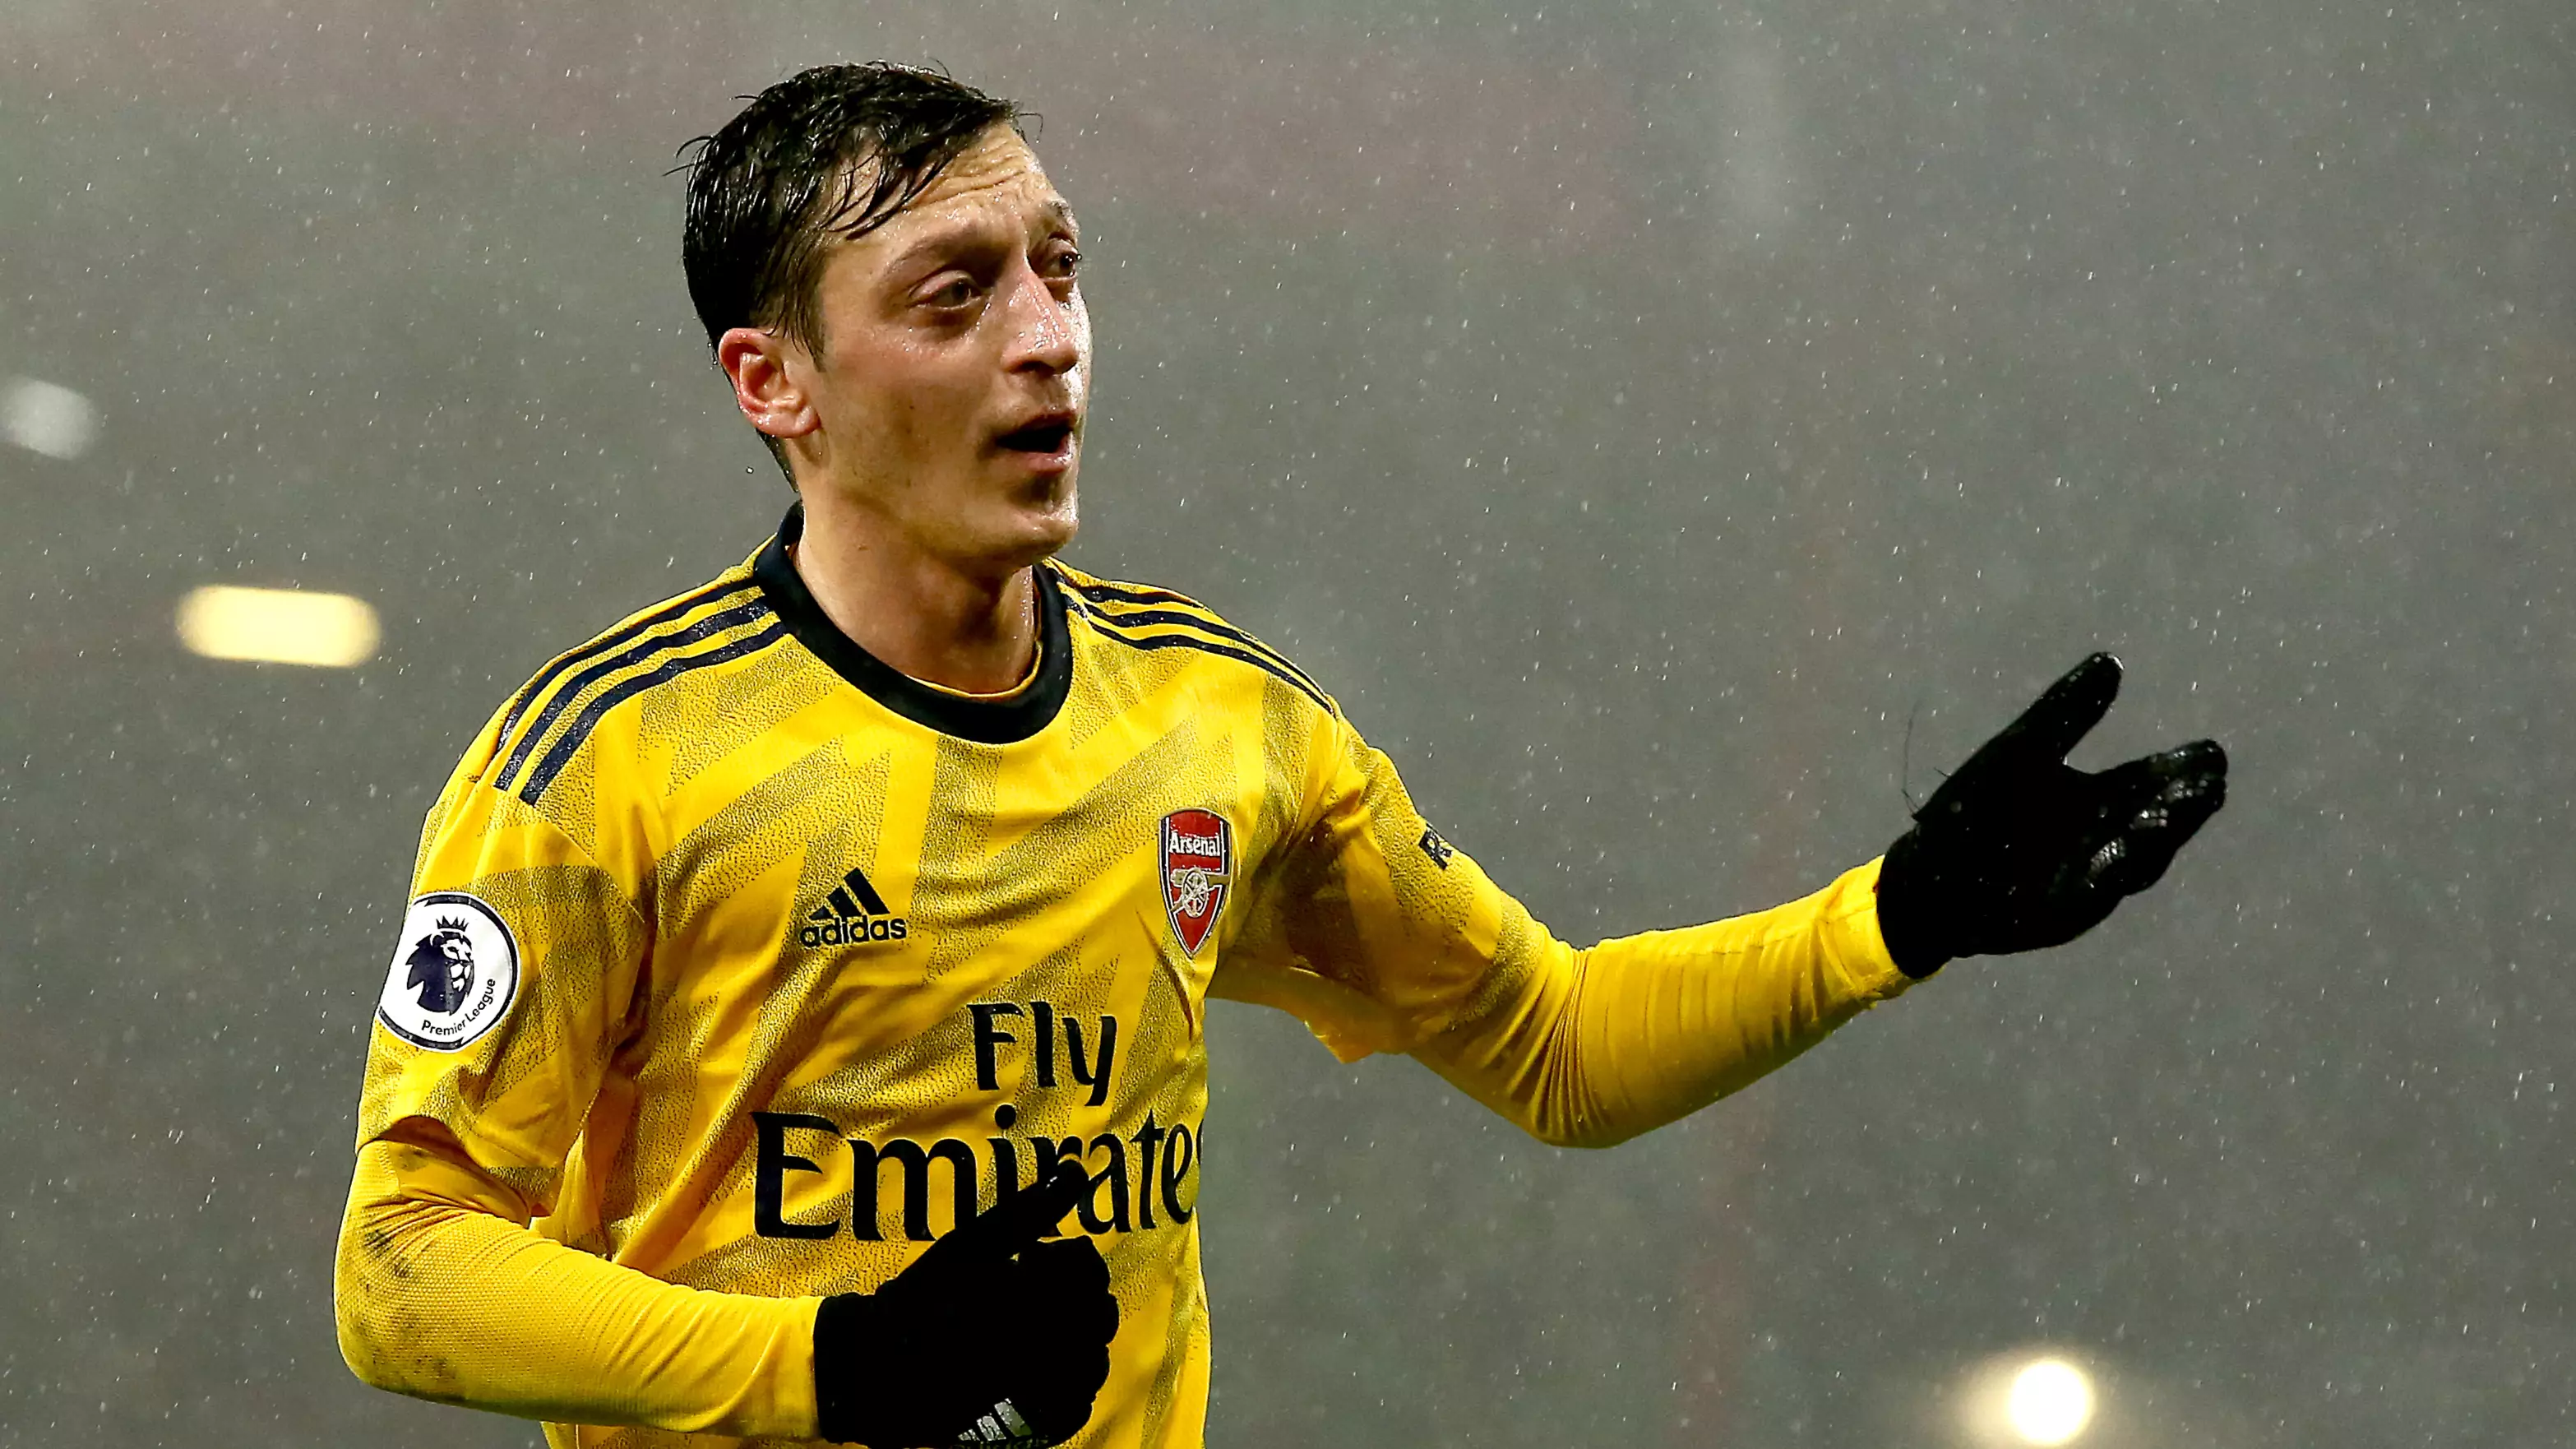 The Staggering Money Mesut Ozil Has Earned Doing Very Little This Season